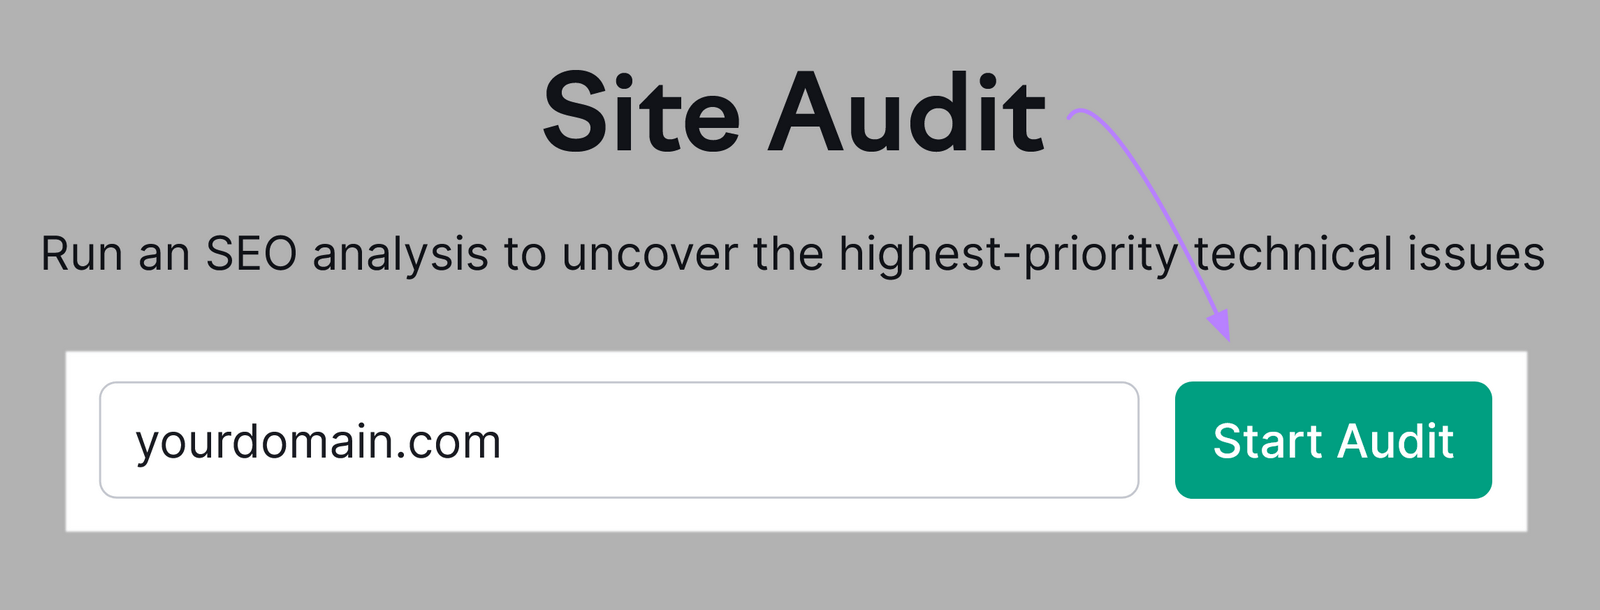 screenshot of Site Audit tool with "yourdomain.com" in search bar